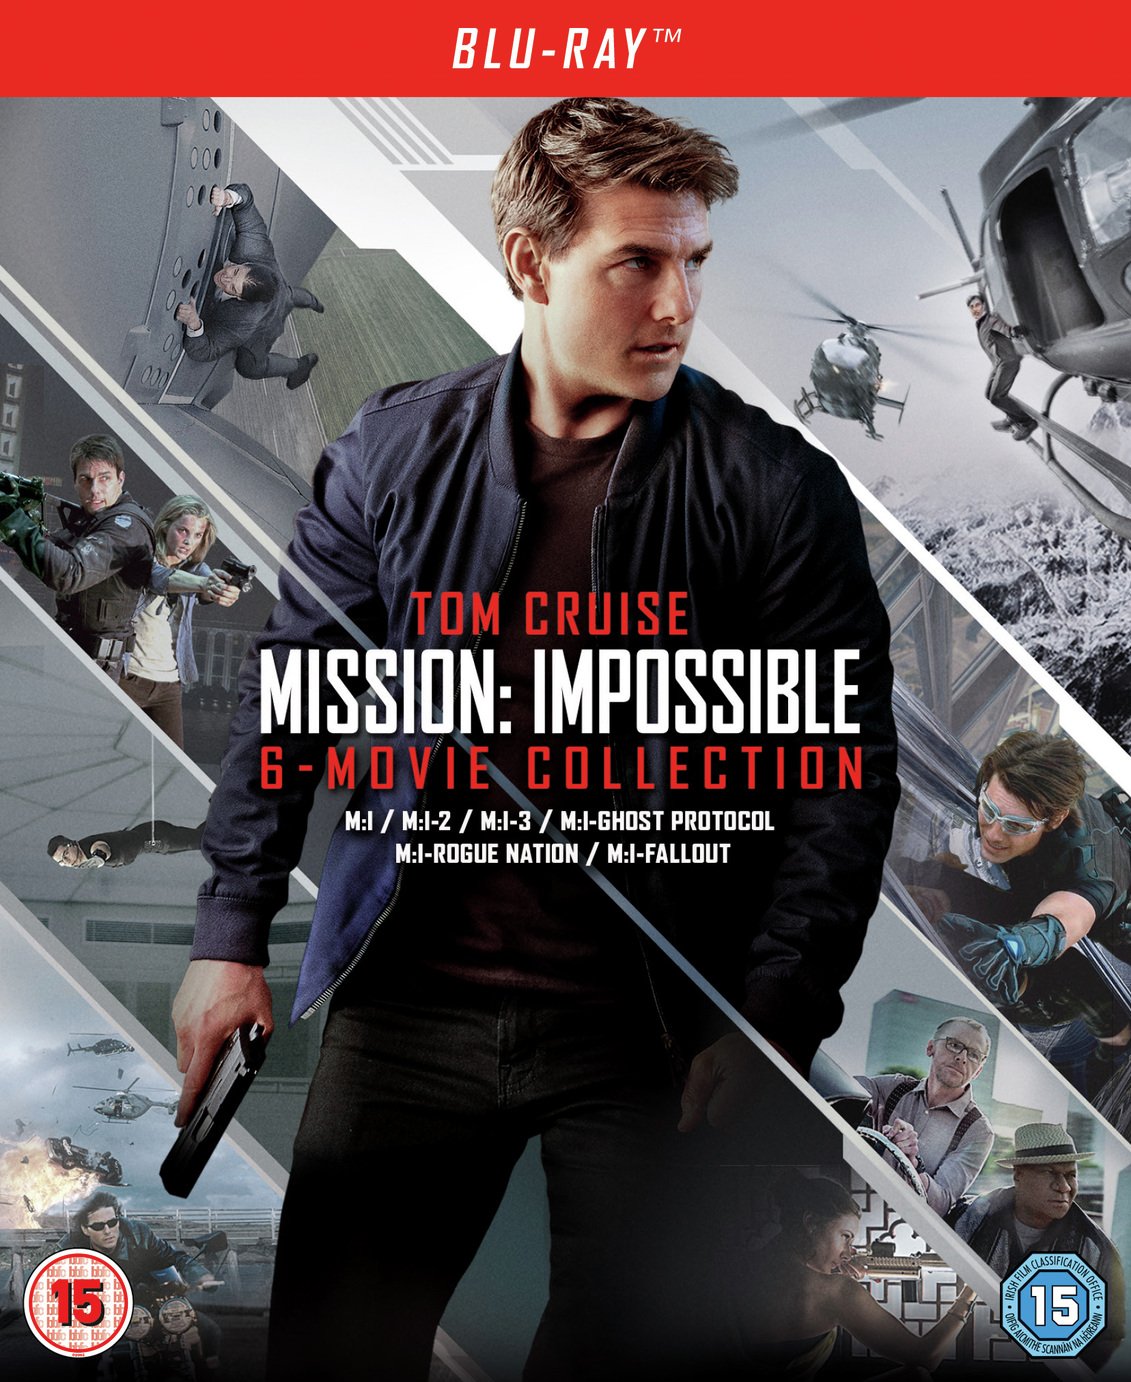 Mission: Impossible The 6 Movie Collection Blu-ray Box Set Review